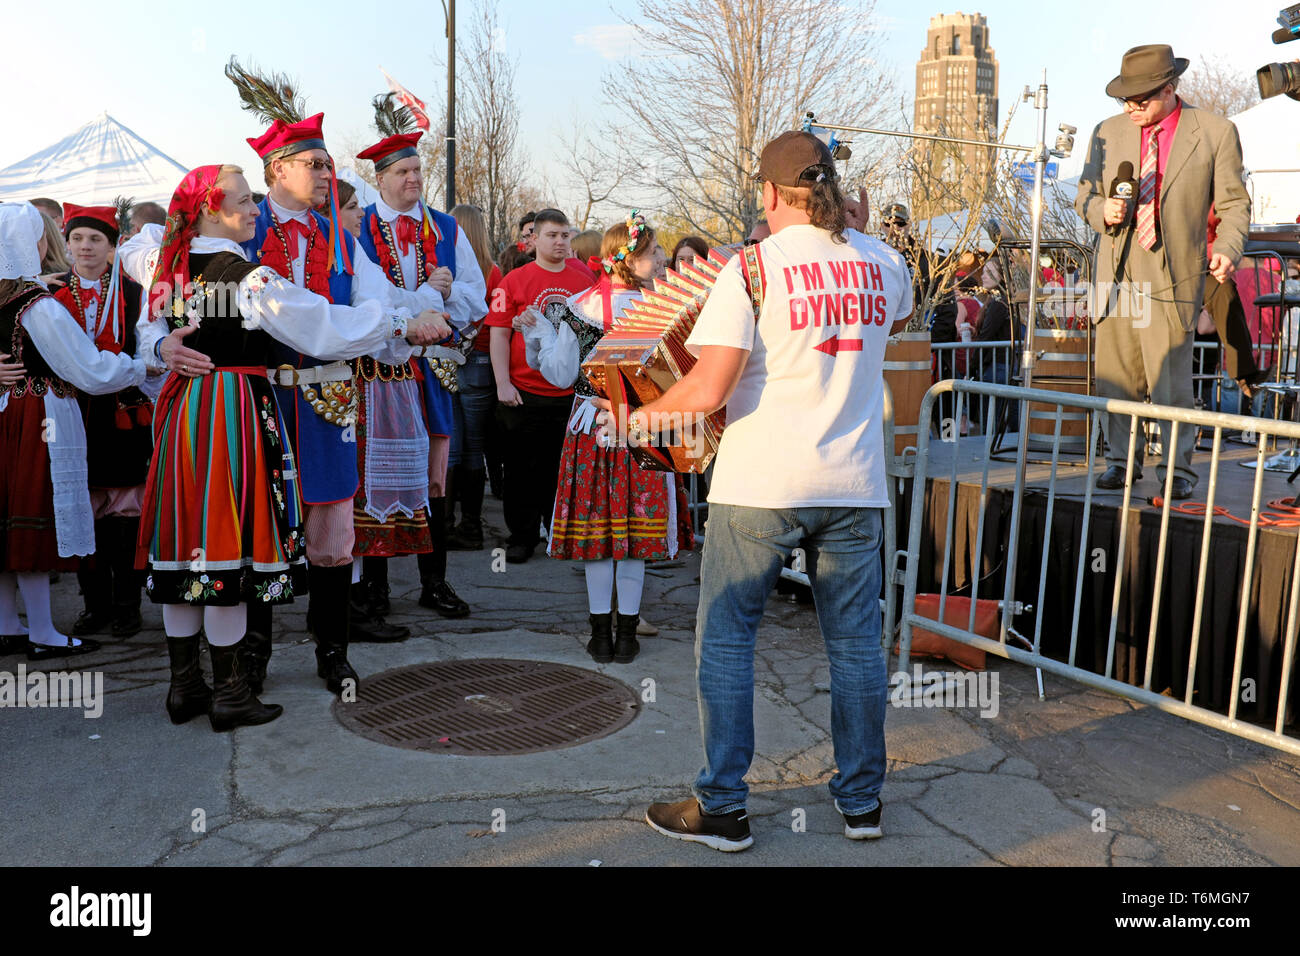 Dyngus Day celebrants dance to the accordian players music during festivities in Buffalo, New York, USA. Stock Photo